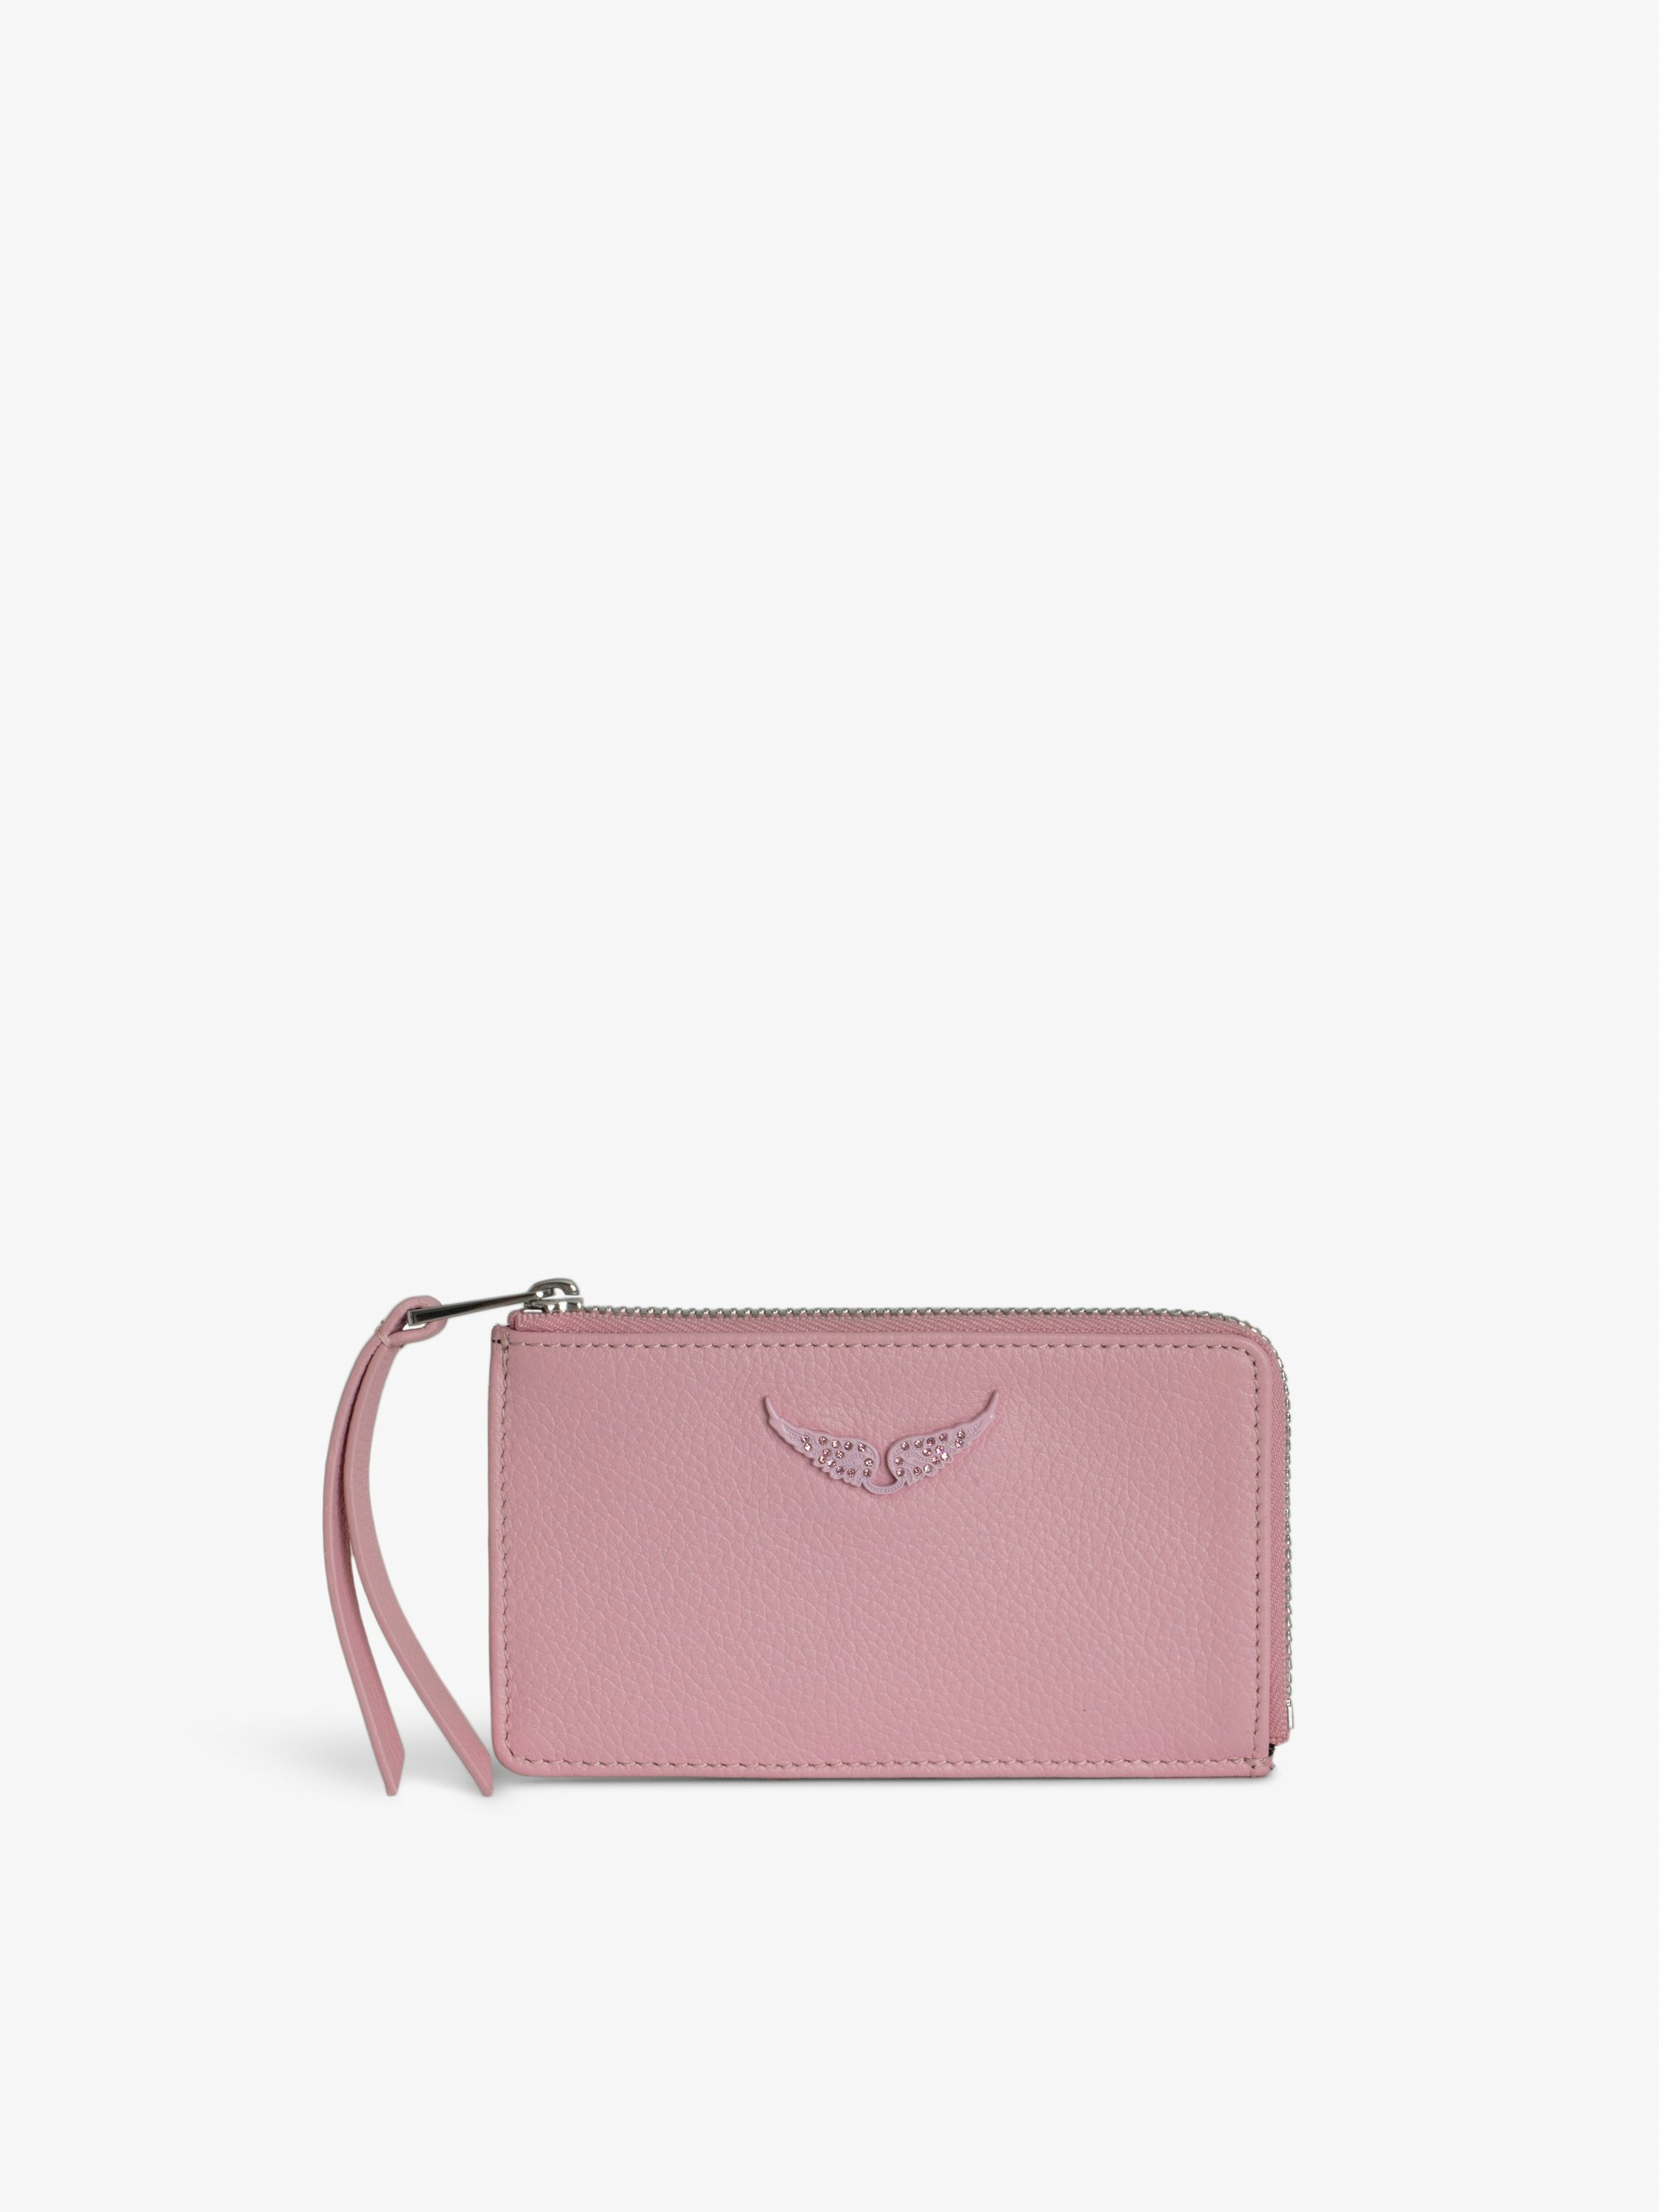 ZV Card Card Holder - Grained leather card holder with signature wings.